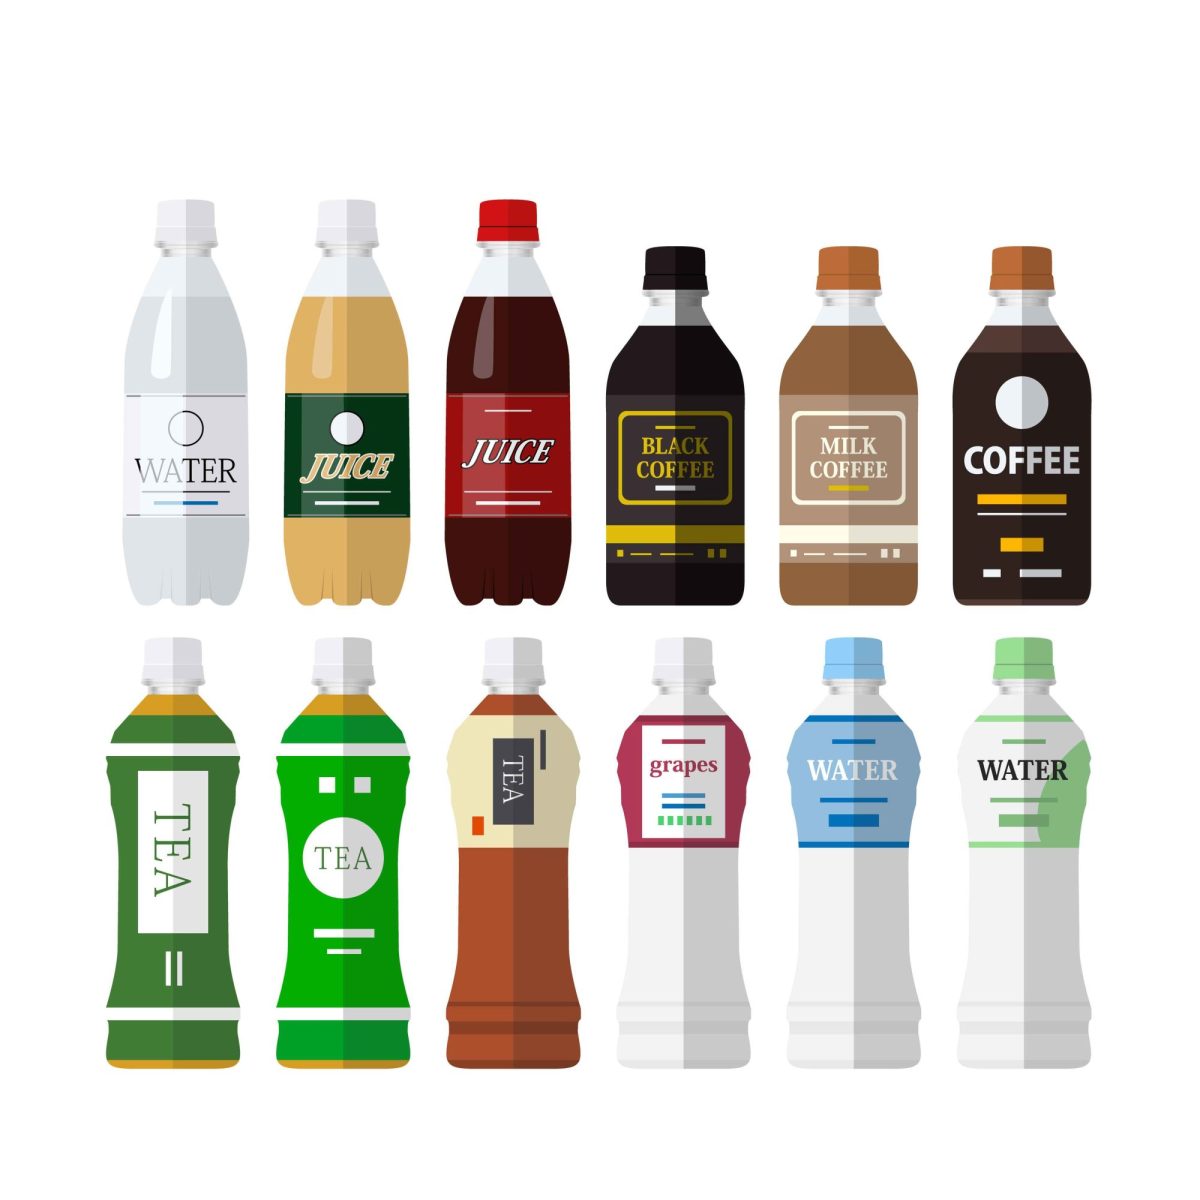 Lincoln Healthy Snacks | Office Micro-Market Beverages | Employee Wellness